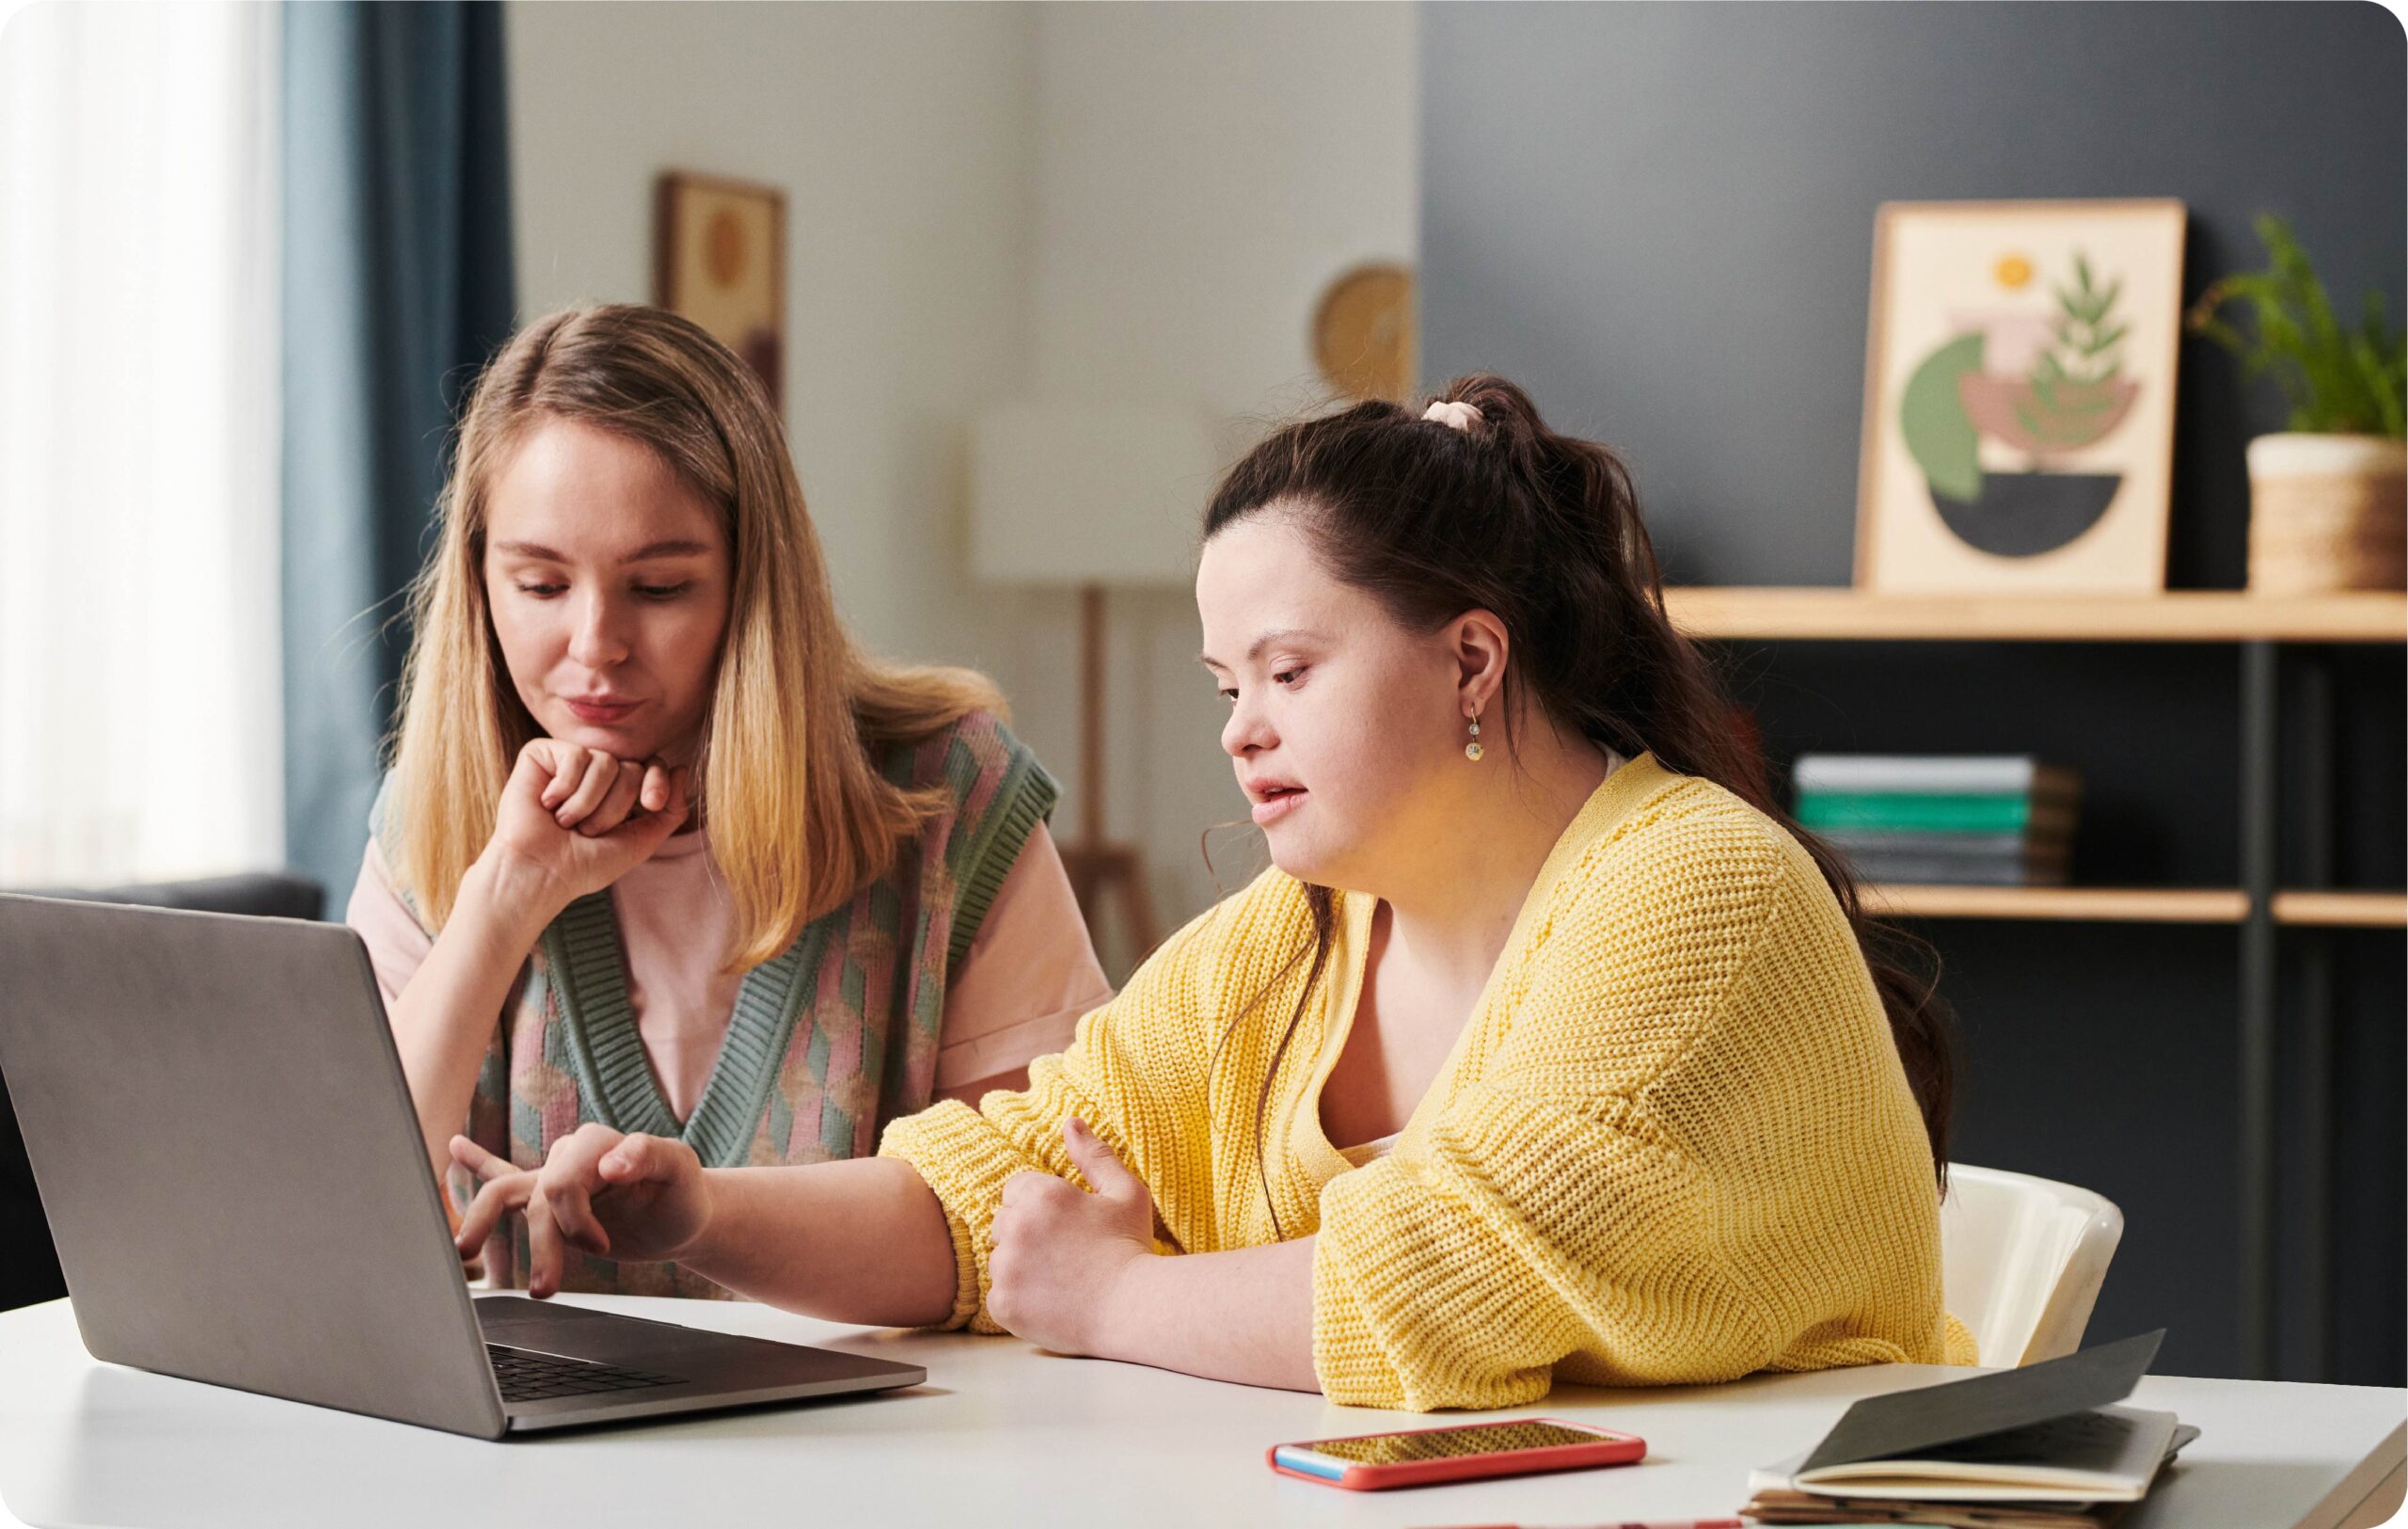 Woman with Down Syndrome wearing a yellow jumper, she is working on a laptop at a table with a blonde woman wearing a pink top.